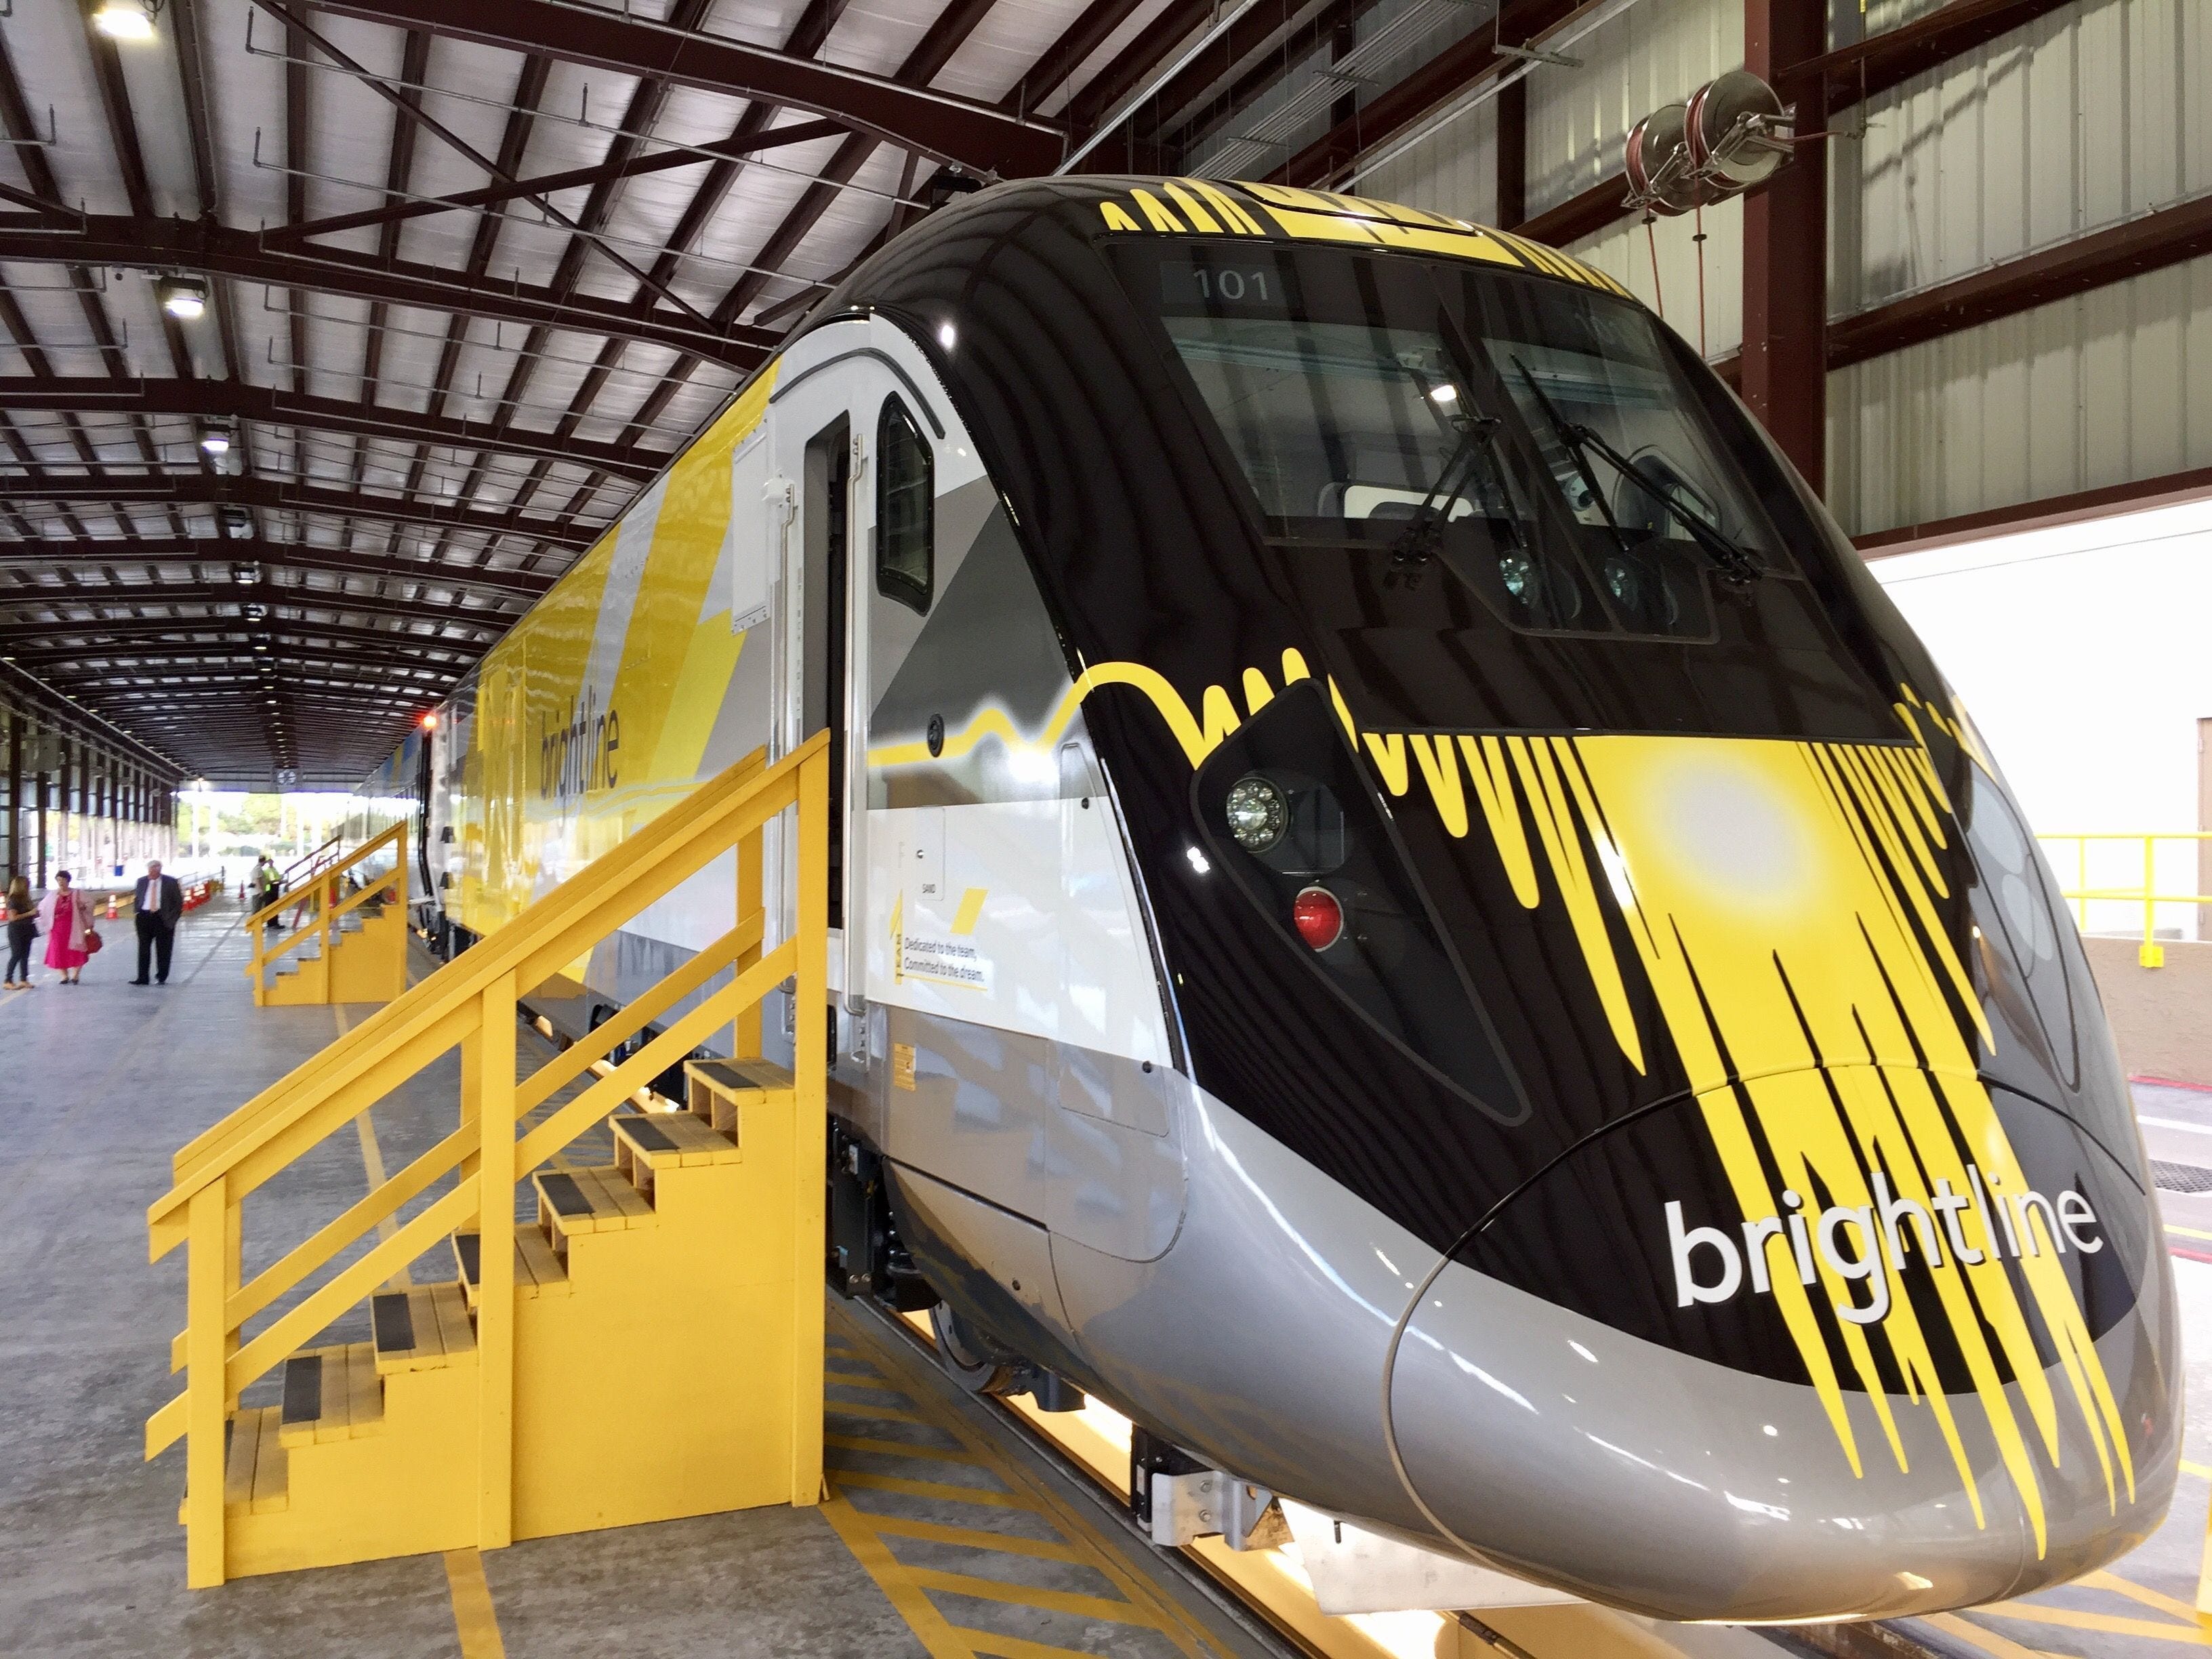 First look: New Florida passenger train unveiled